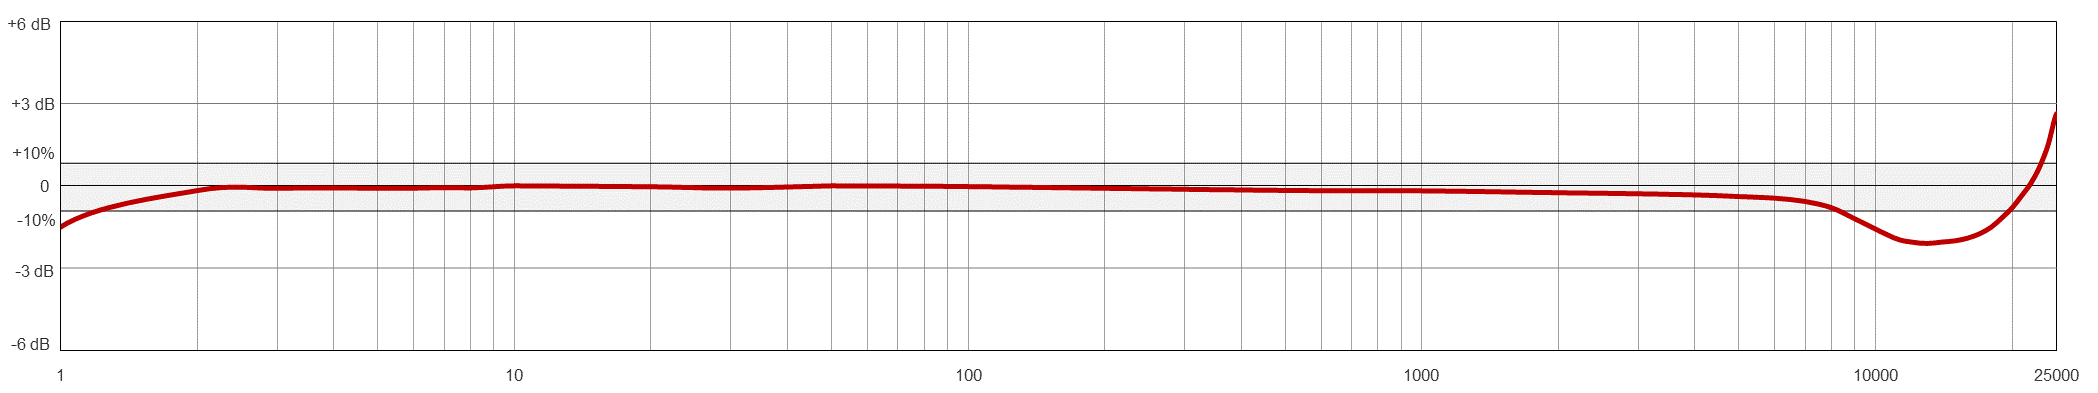 A line graph showing the frequency resopnse of a CTC AC220 condition monitoring sensor.